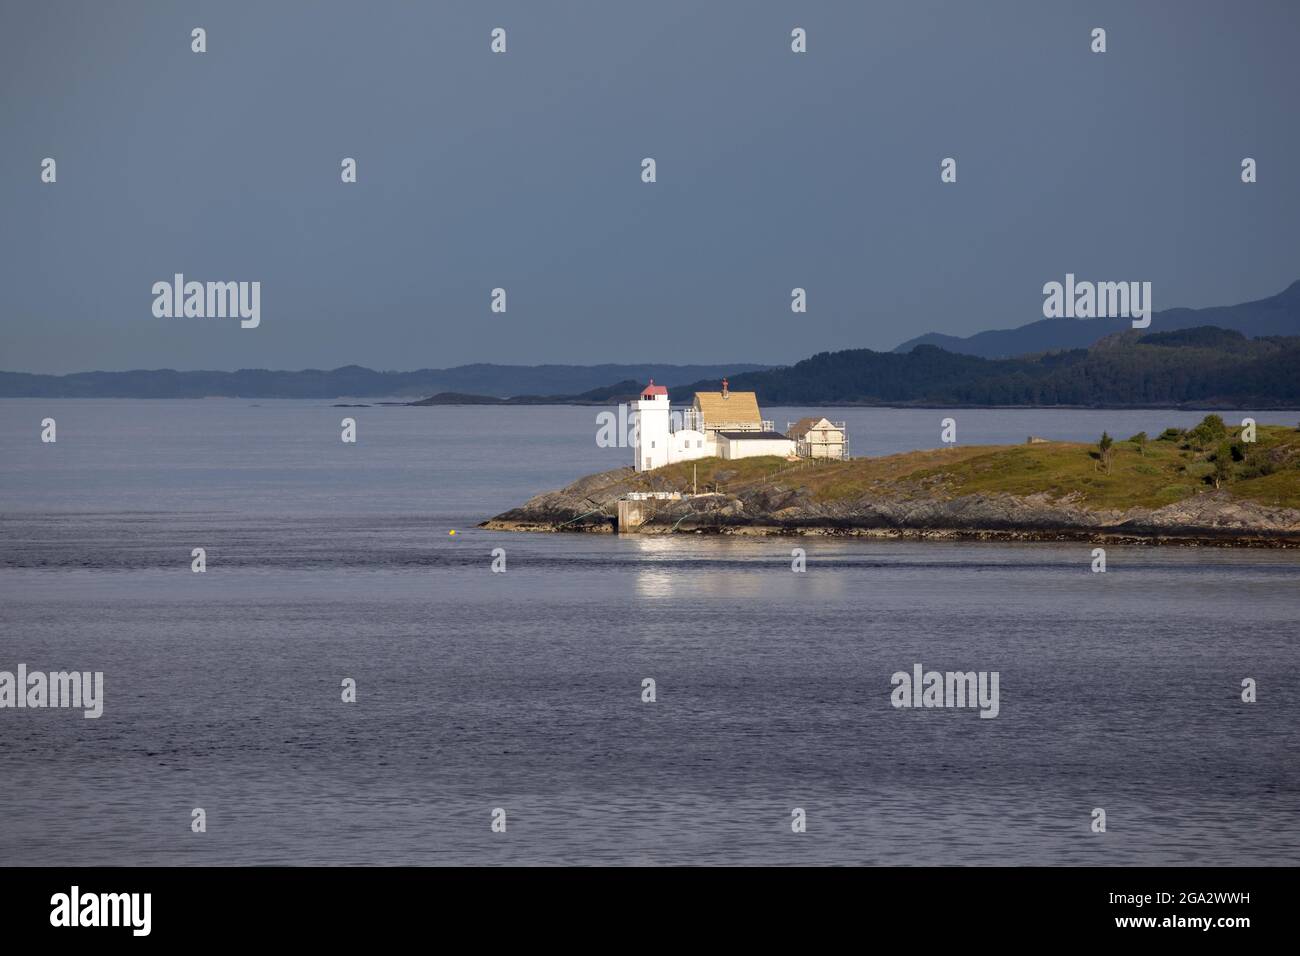 Terningen Lighthouse on a remote island in the Municipality of Hitra near the mouth of the Hemnfjorden in the Western Fjords of Norway Stock Photo